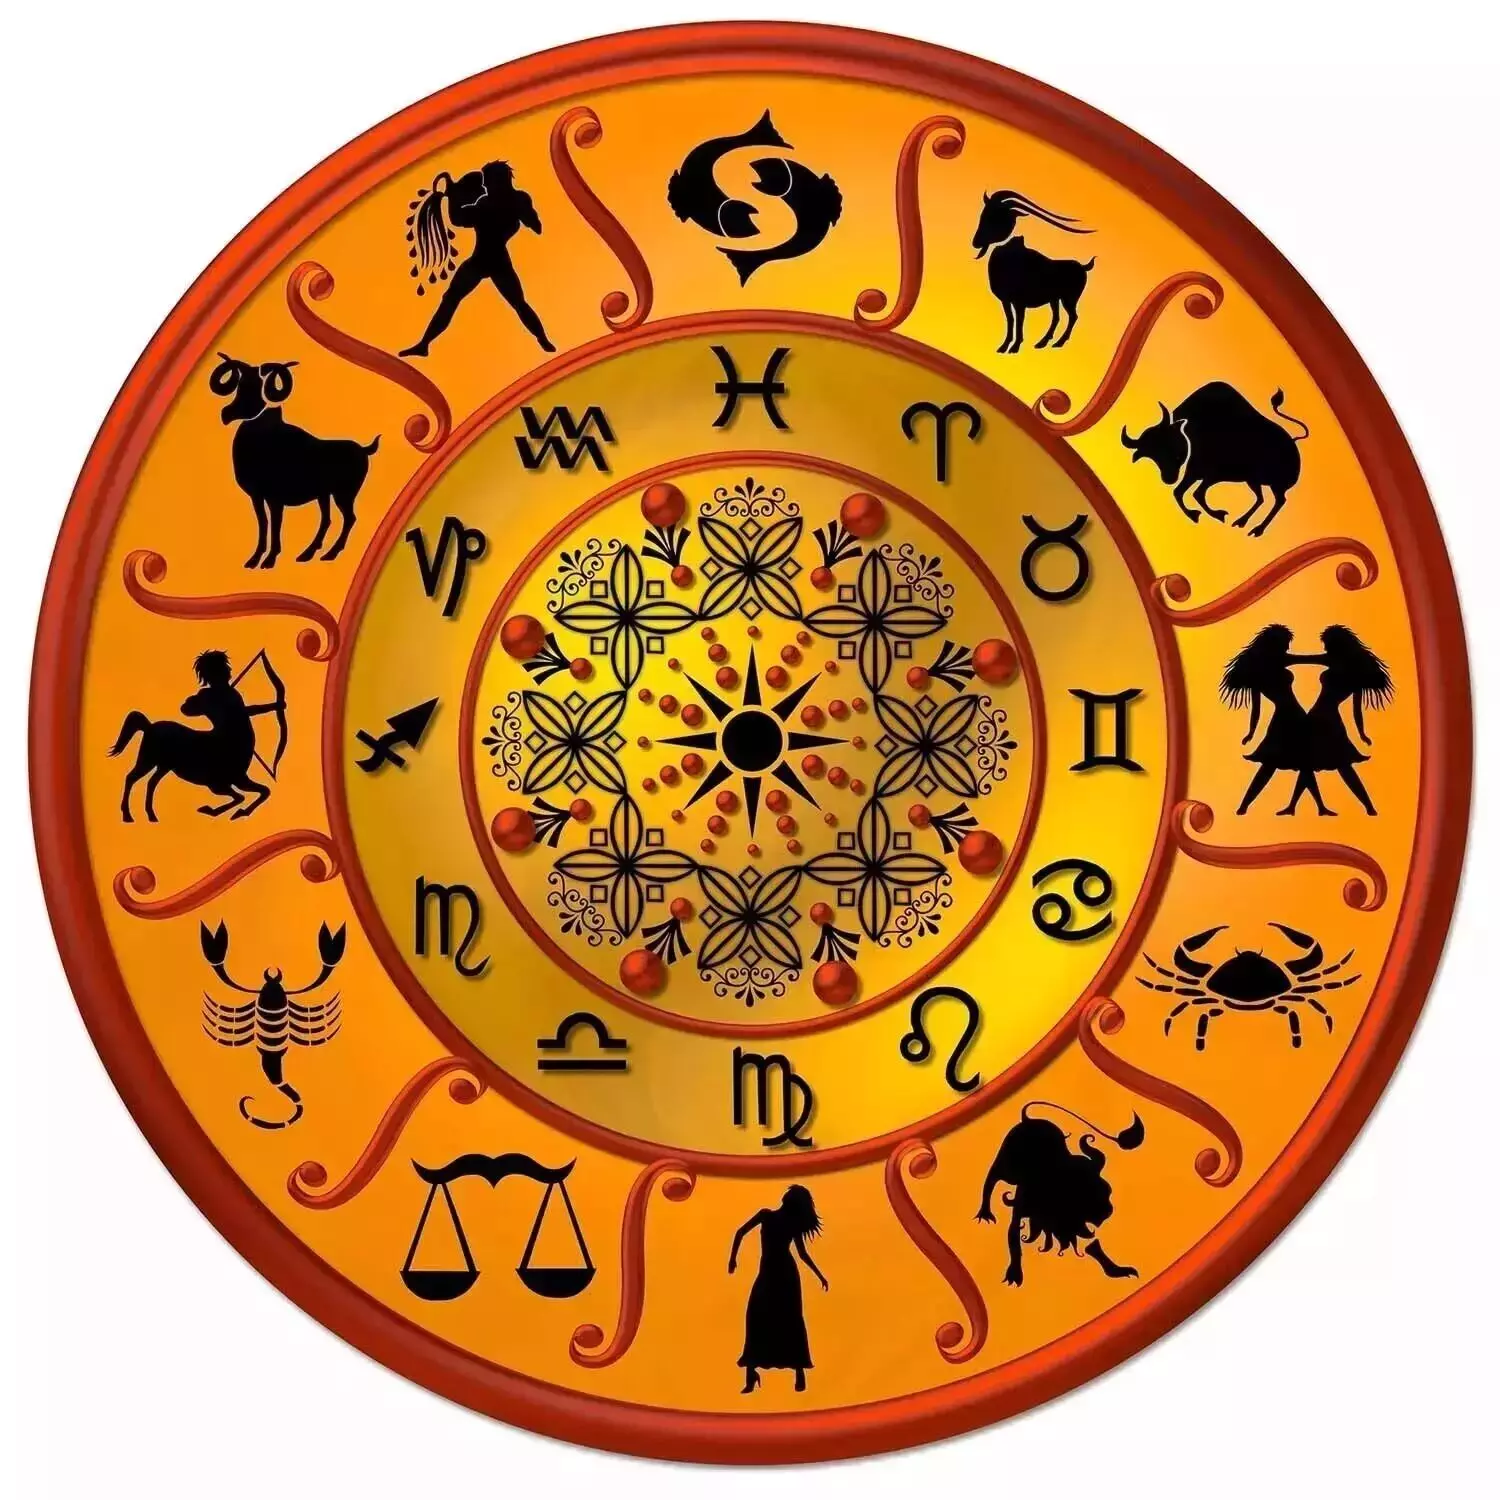 19 March  – Know your todays horoscope